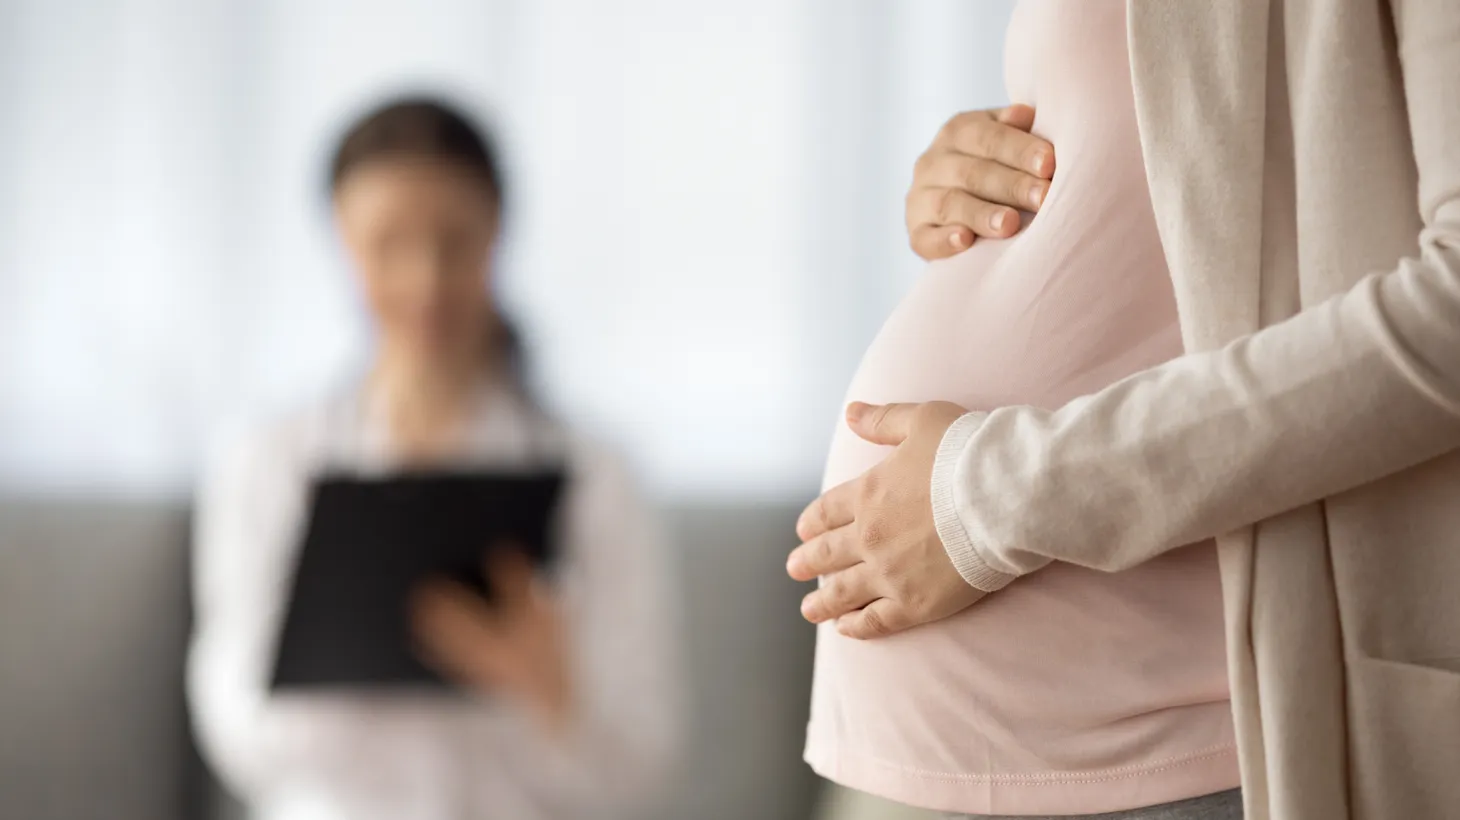 A pregnant person has a check-up with a physician at a health clinic.